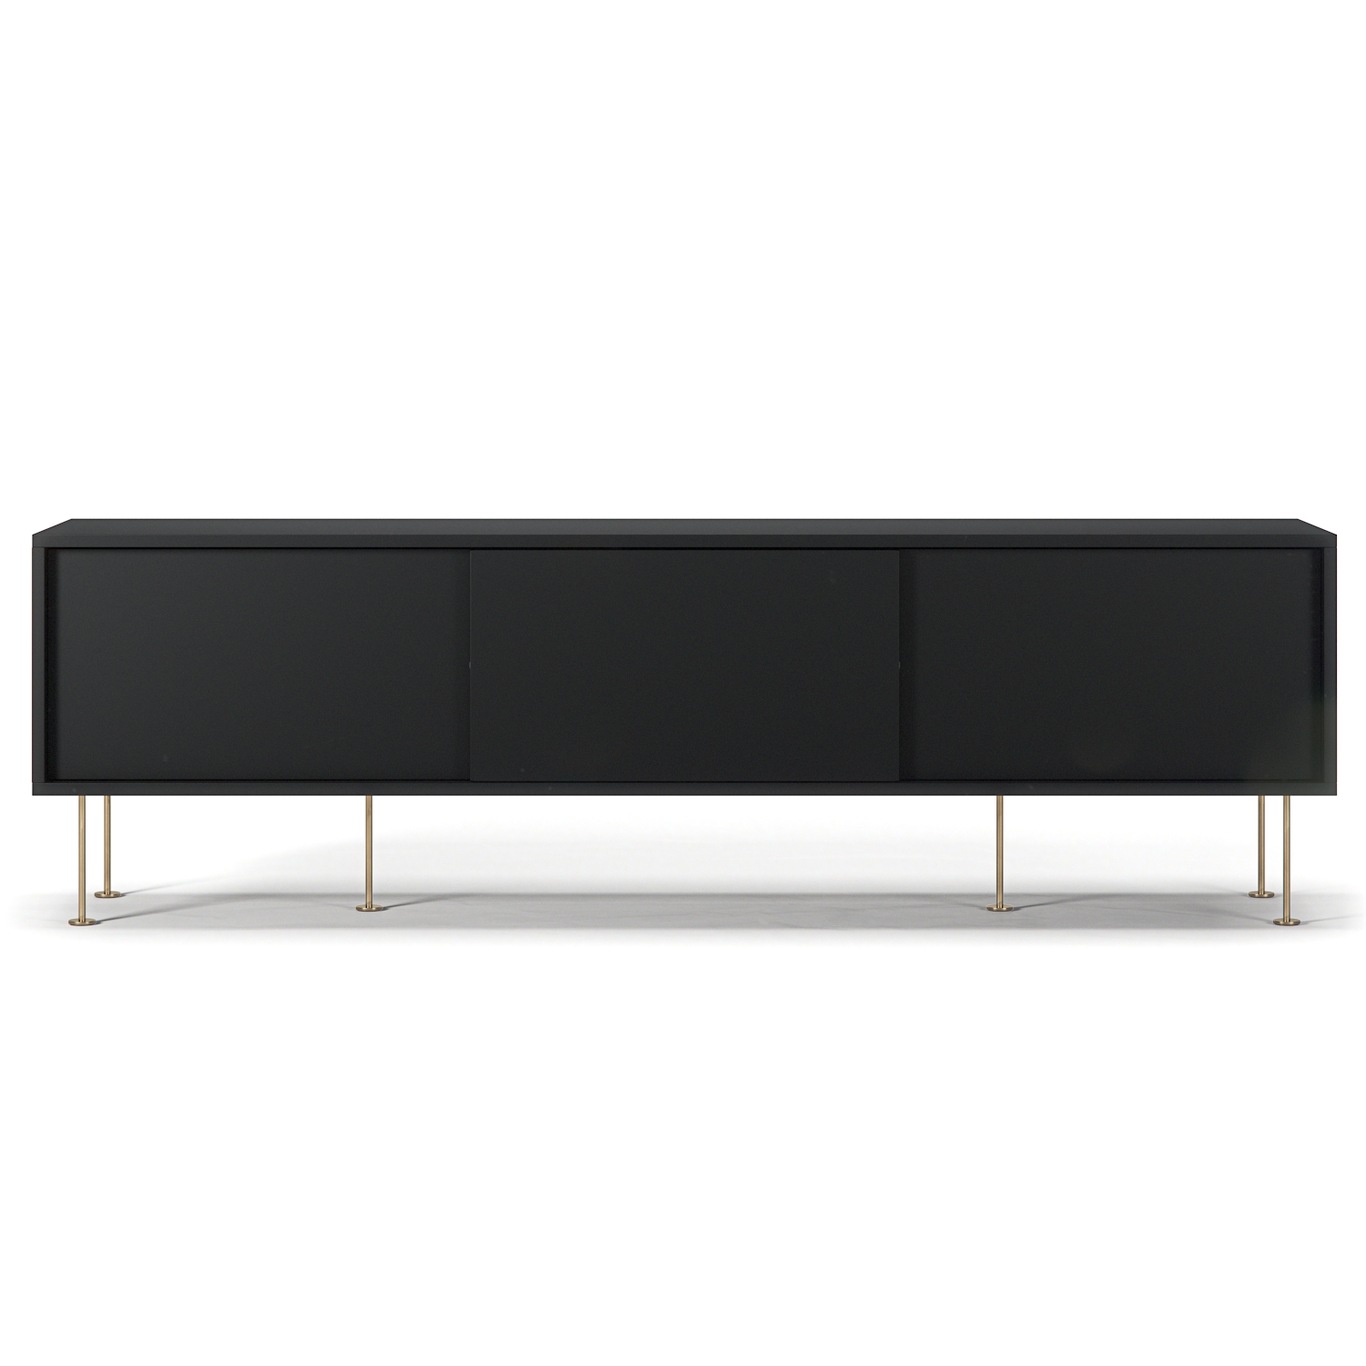 Vogue Media Bench With Legs 180 cm, Anthracite / Brass